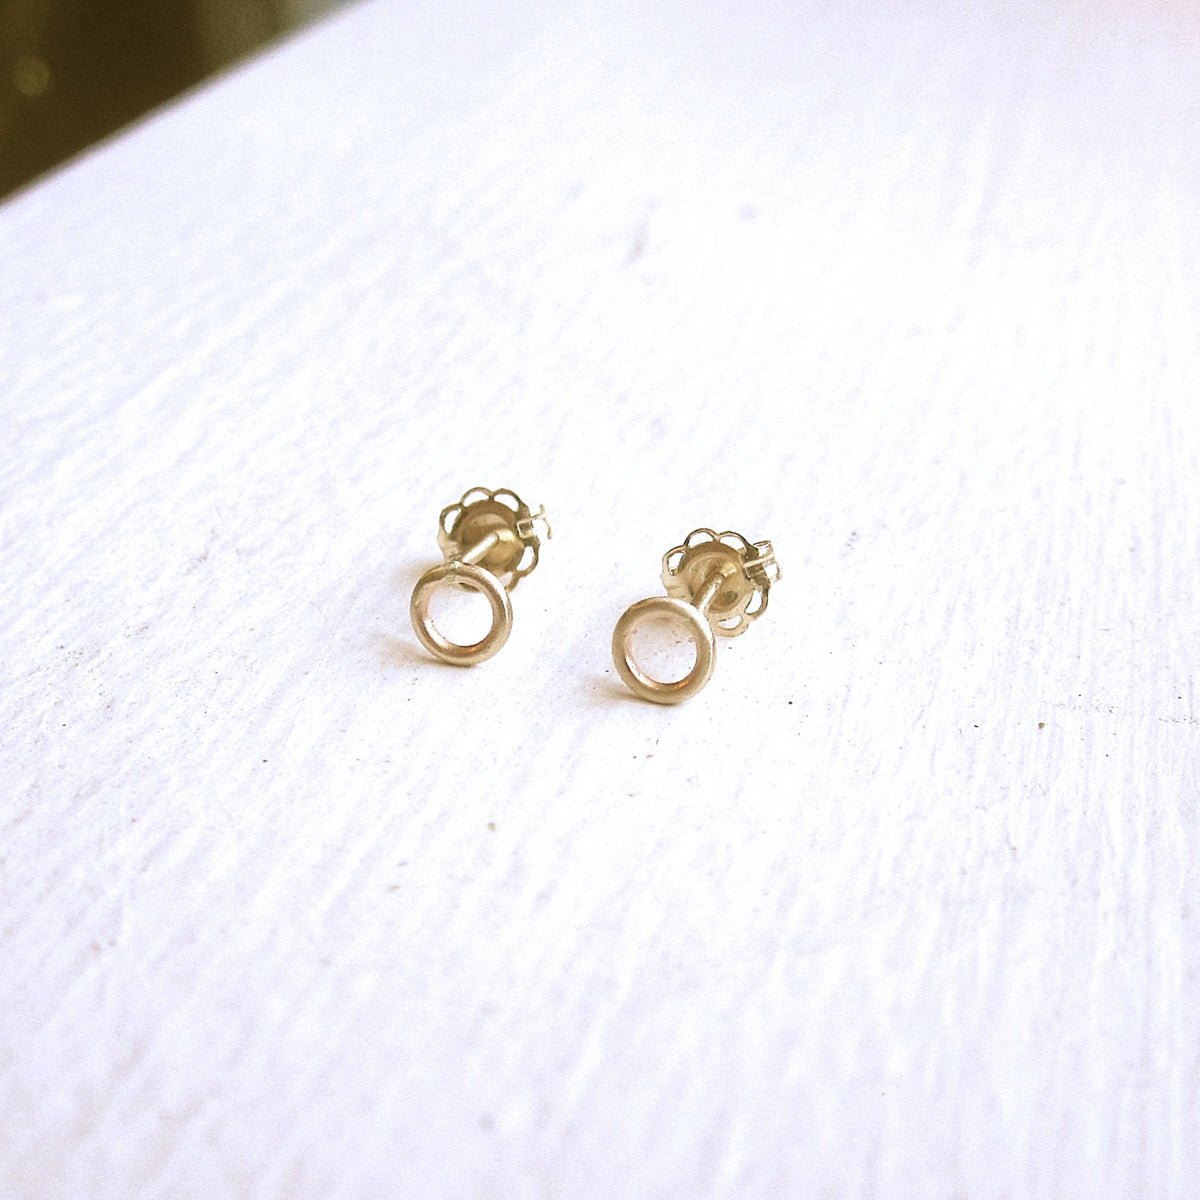 Delicate And Distinctive Hand-Made Open Circle Stud Earrings - 0126 - Virginia Wynne Designs